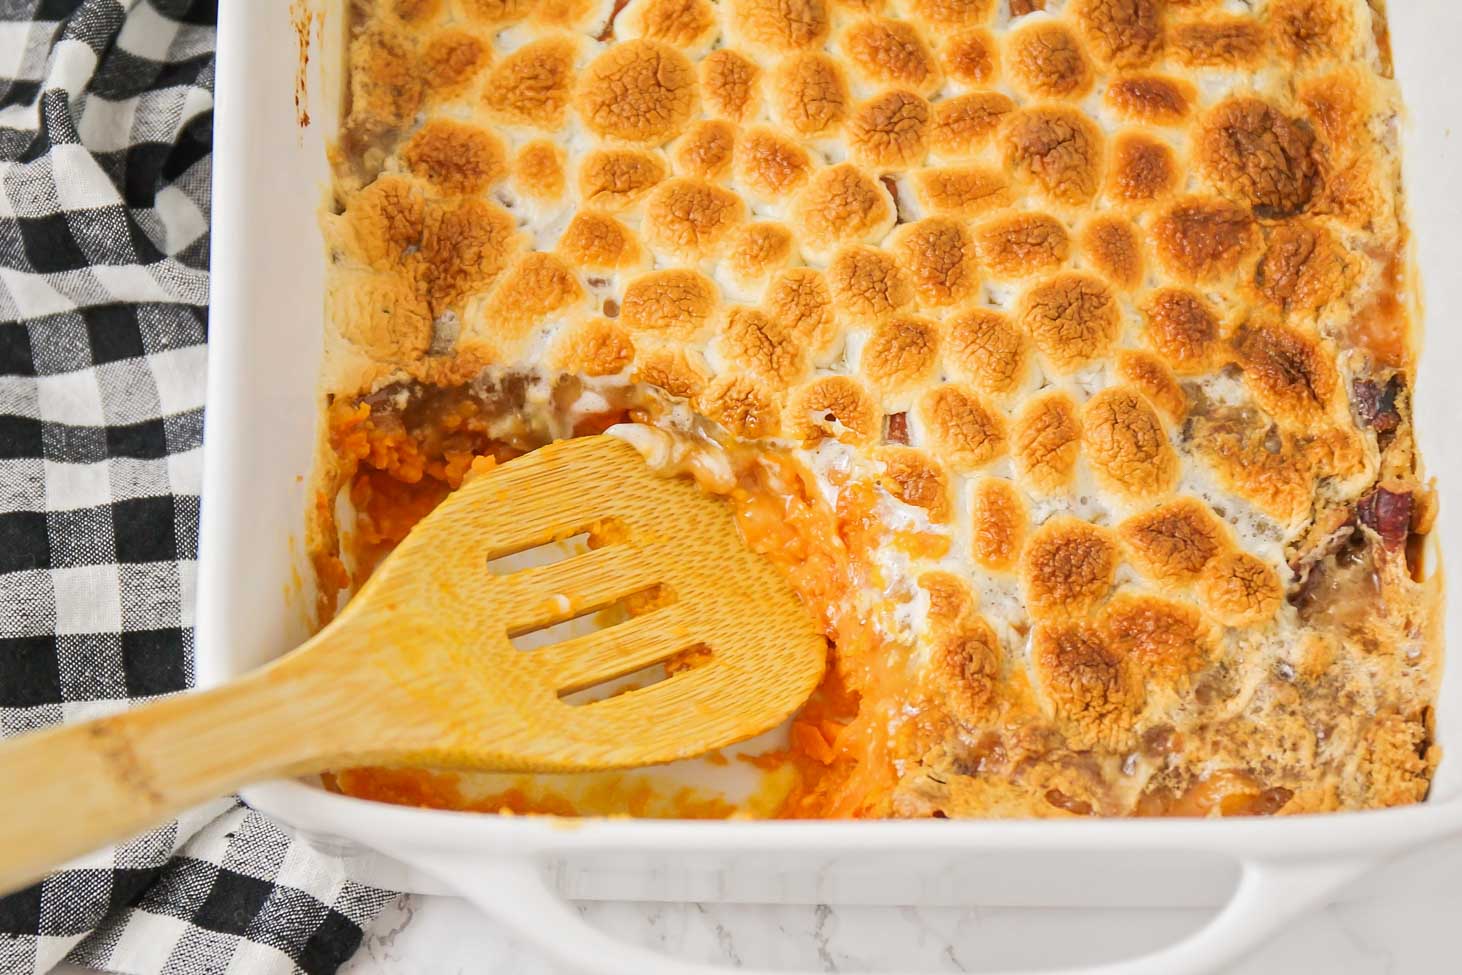 Thanksgiving side dishes - sweet potato casserole up close.